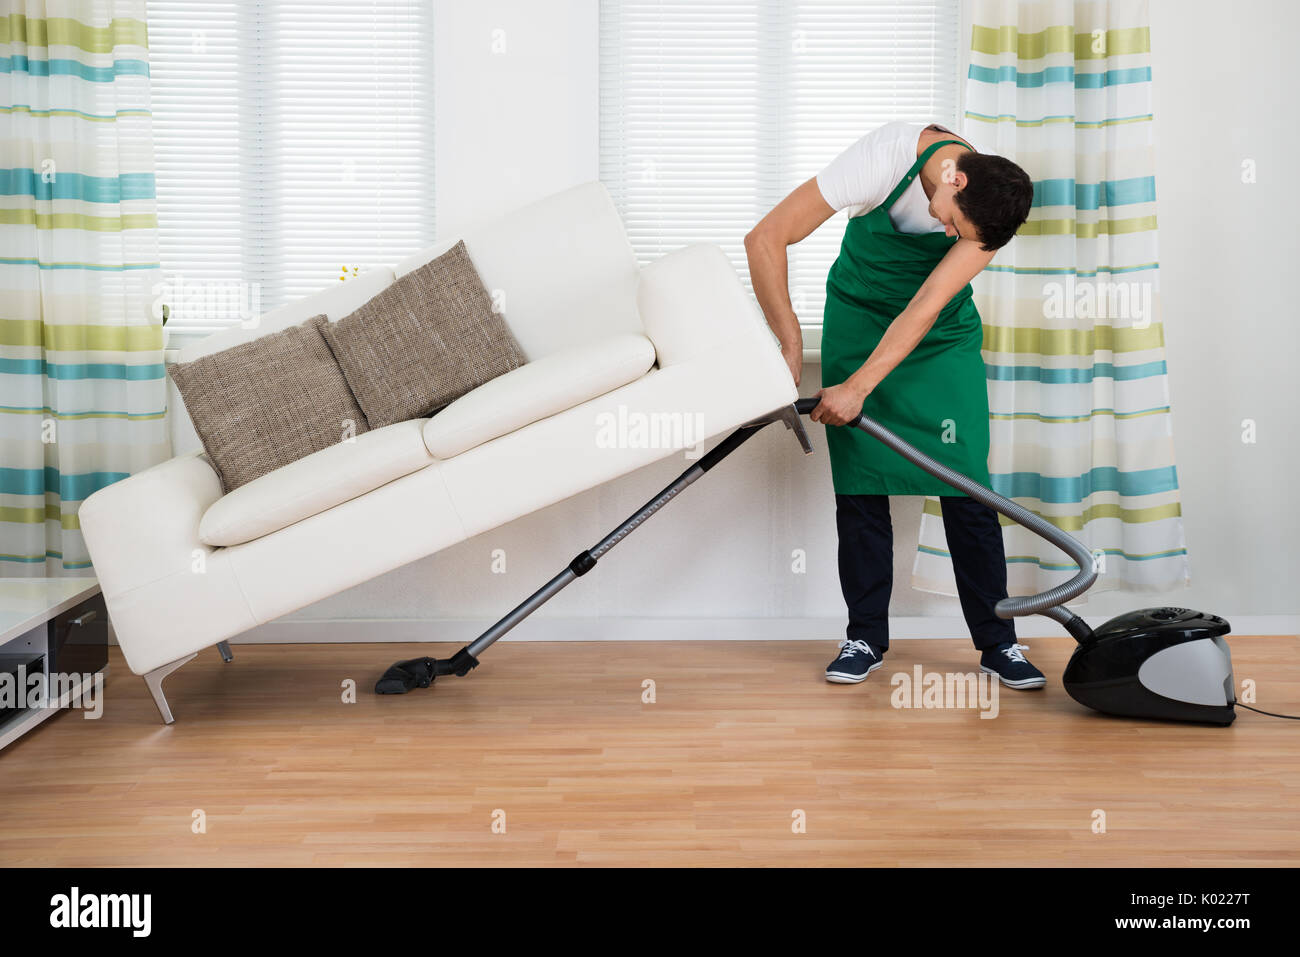 Full length of man lifting couch while cleaning hardwood floor with vacuum cleaner at home Stock Photo